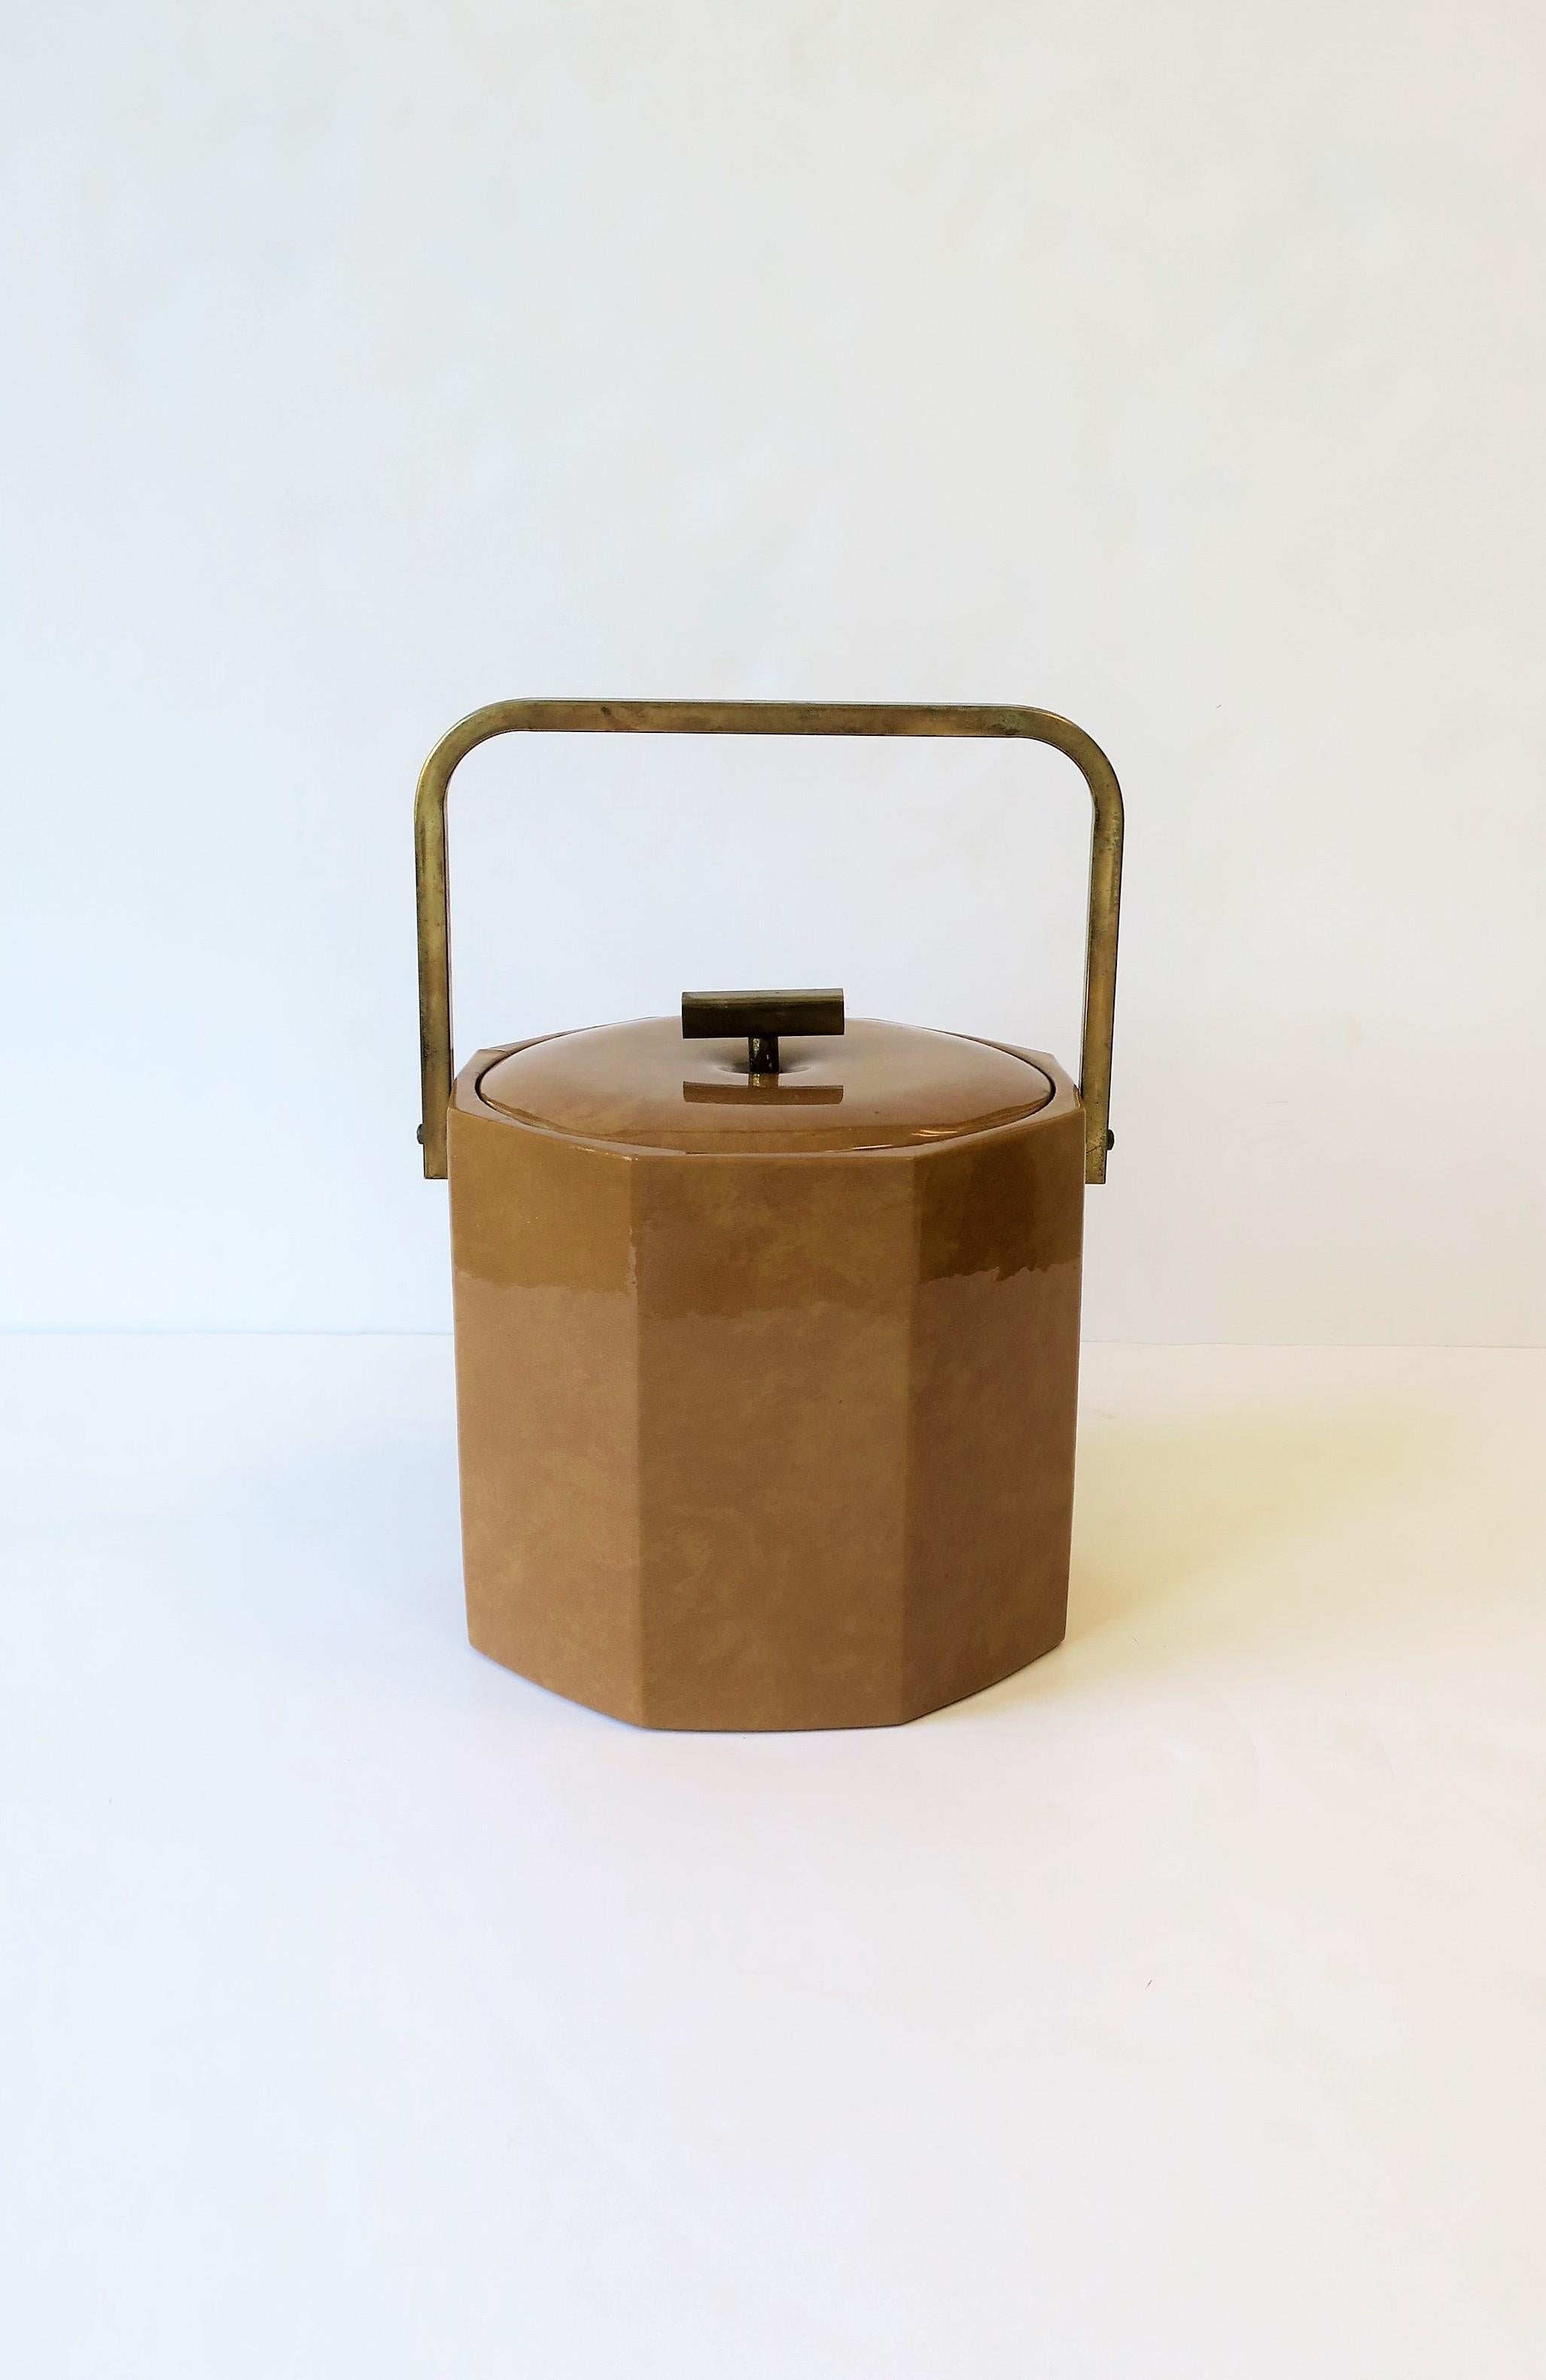 A chic goatskin style ice bucket or wine/champagne cooler by designer Georges Briard, circa 1970s. Ice bucket has and octagonal exterior shape and brass-tone metal handles.

Measurements: 
13